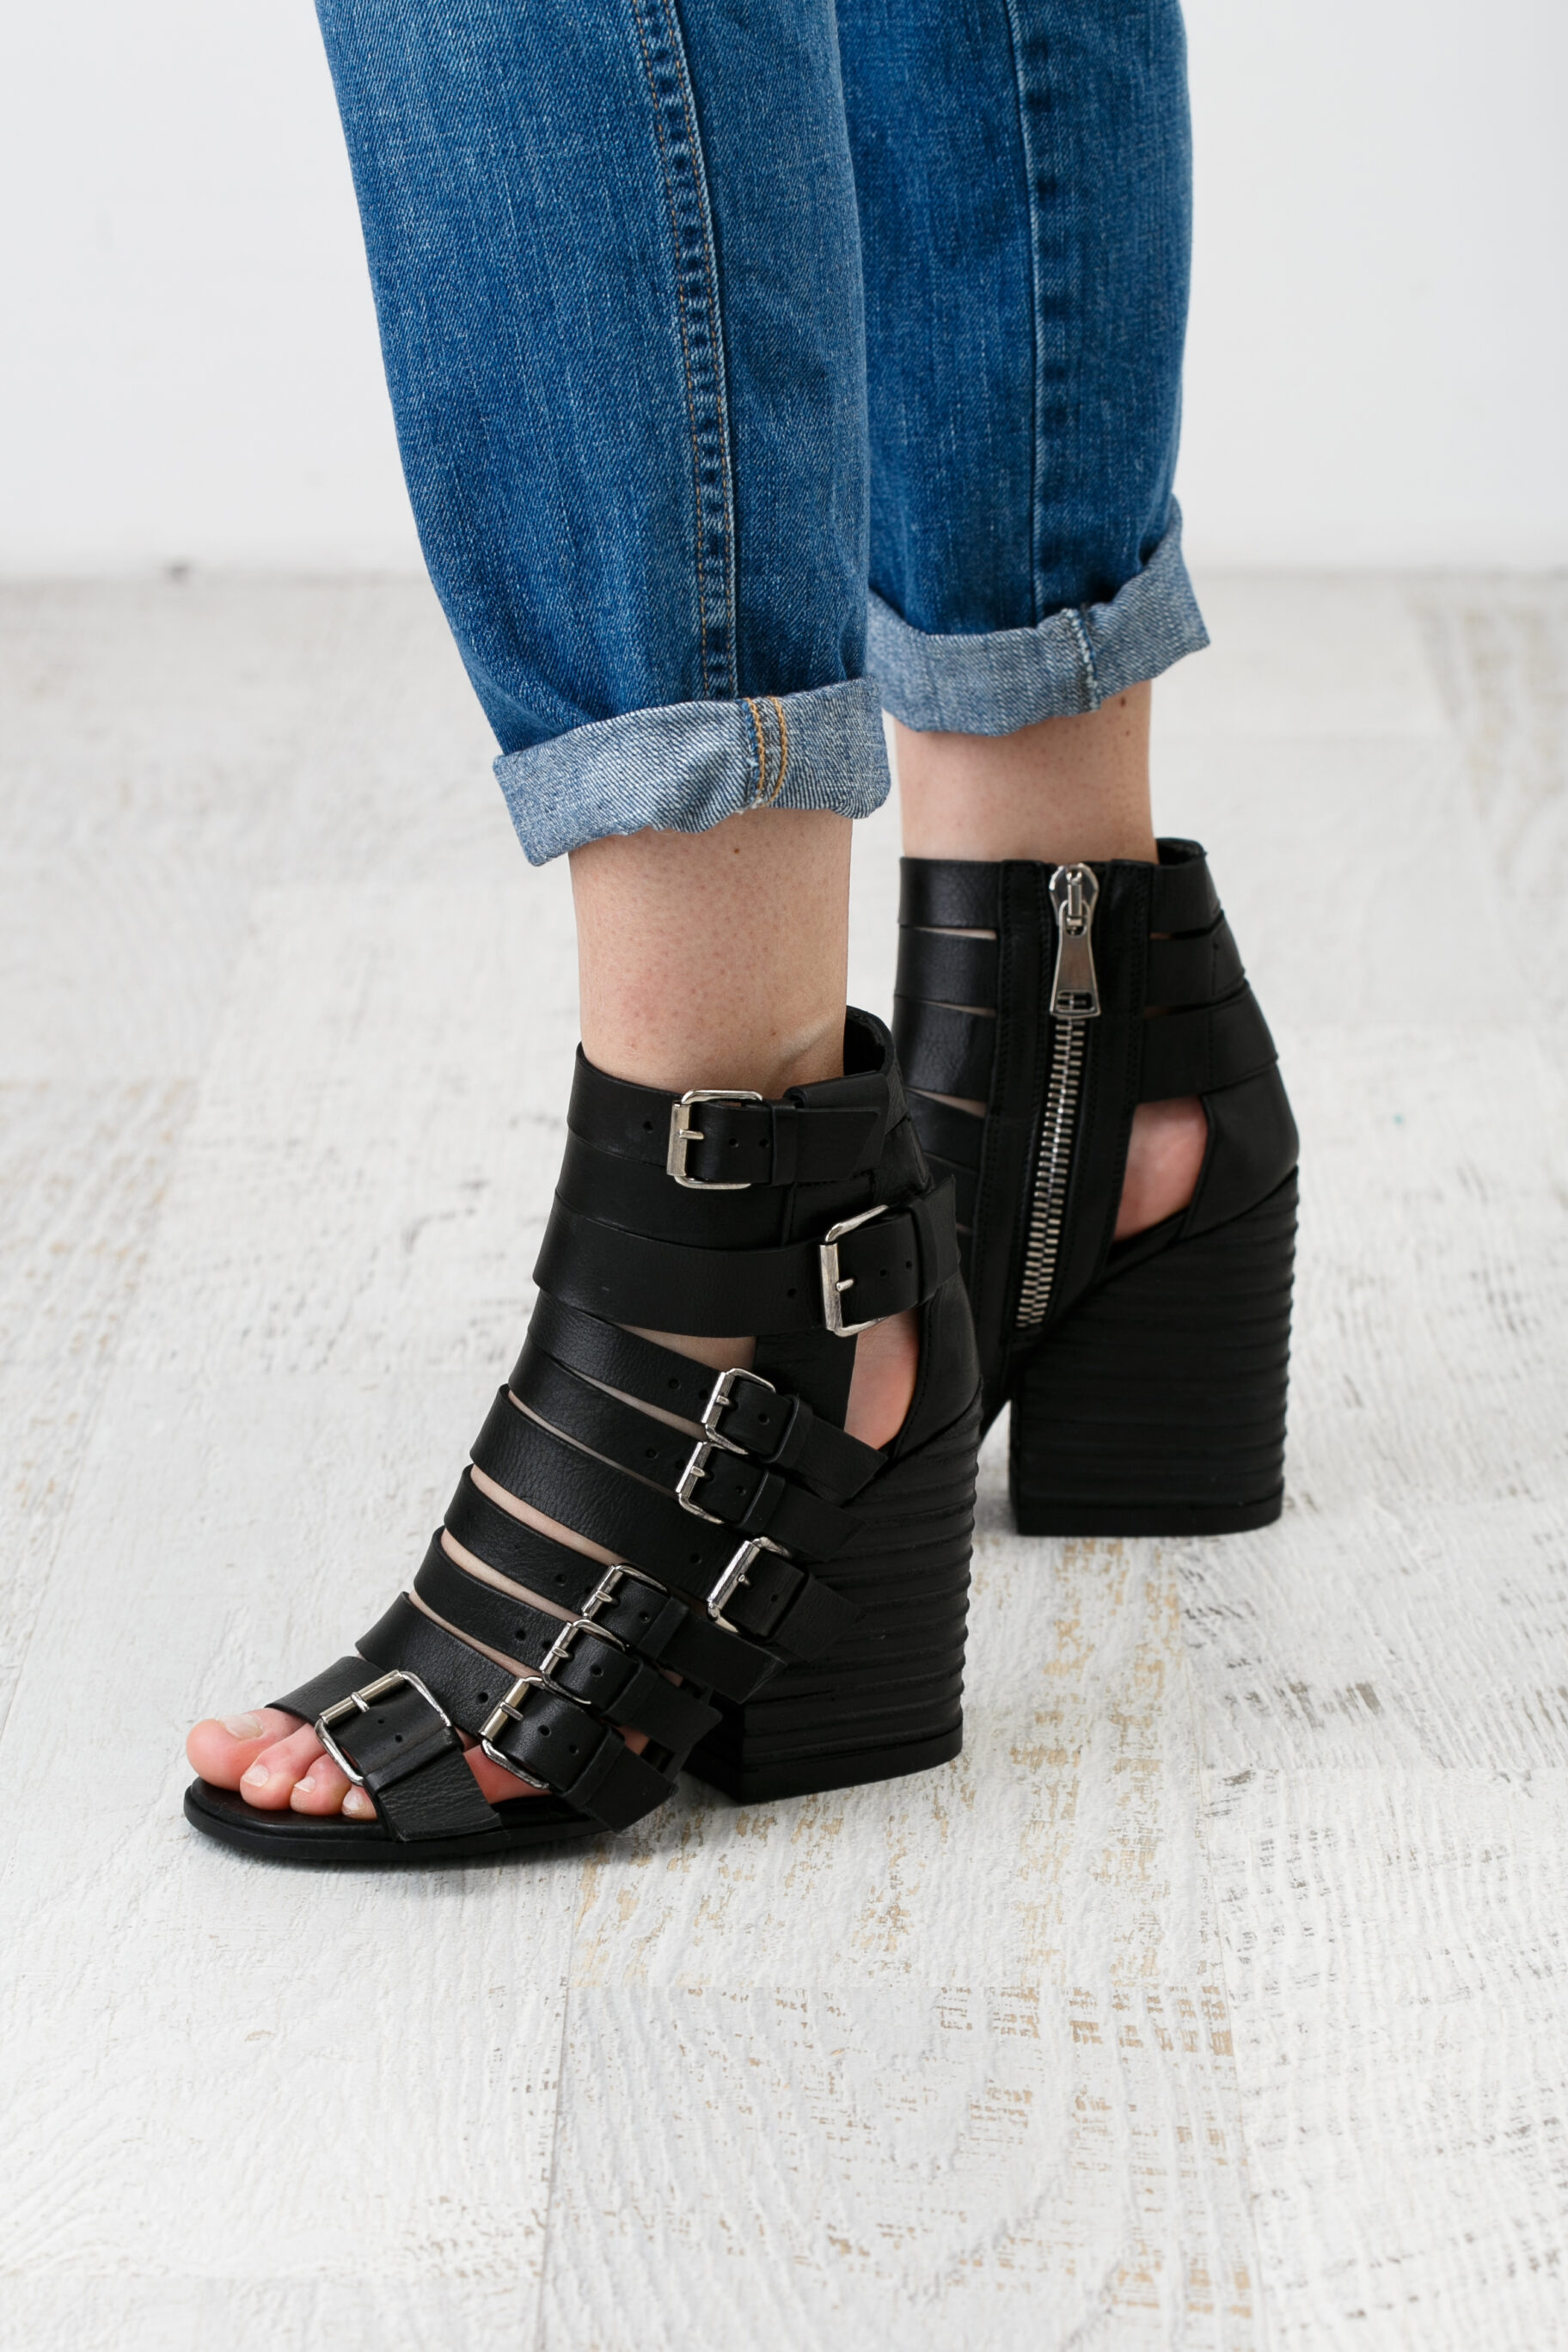 Jeans With Chunky Platform Sandals